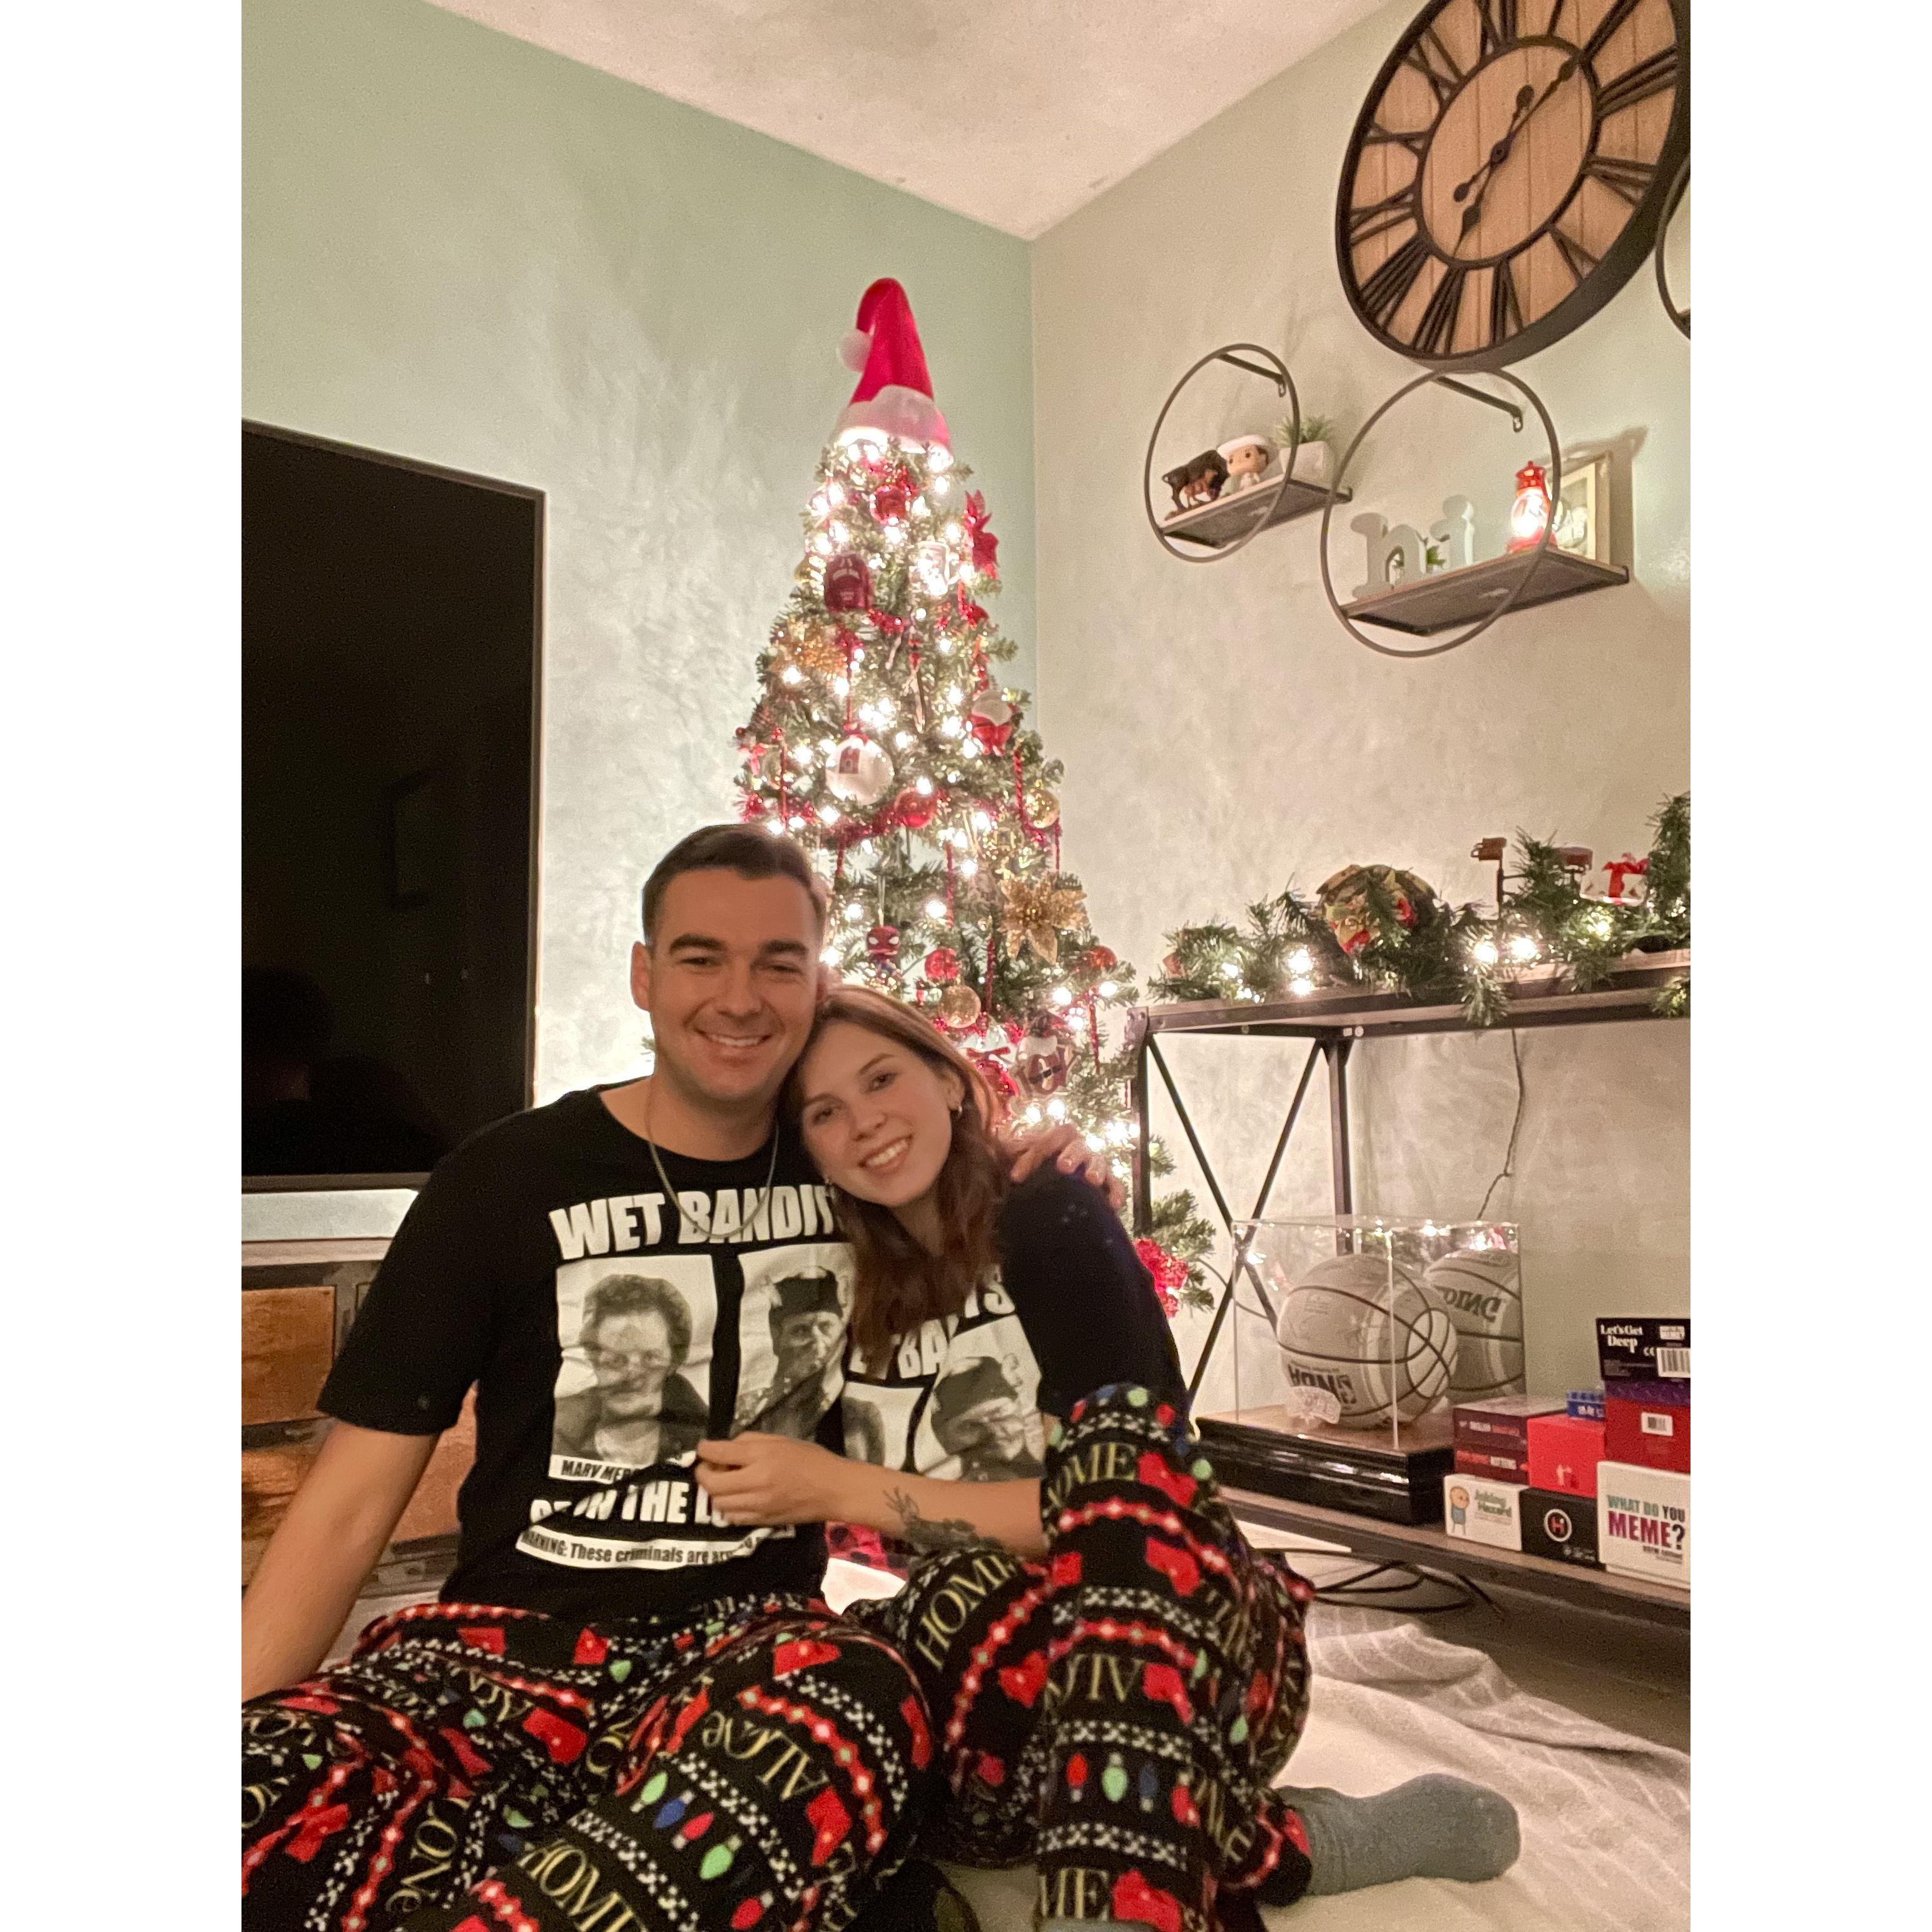 Our first Christmas, Fun fact we have yet to spend a single Christmas Day together so far.